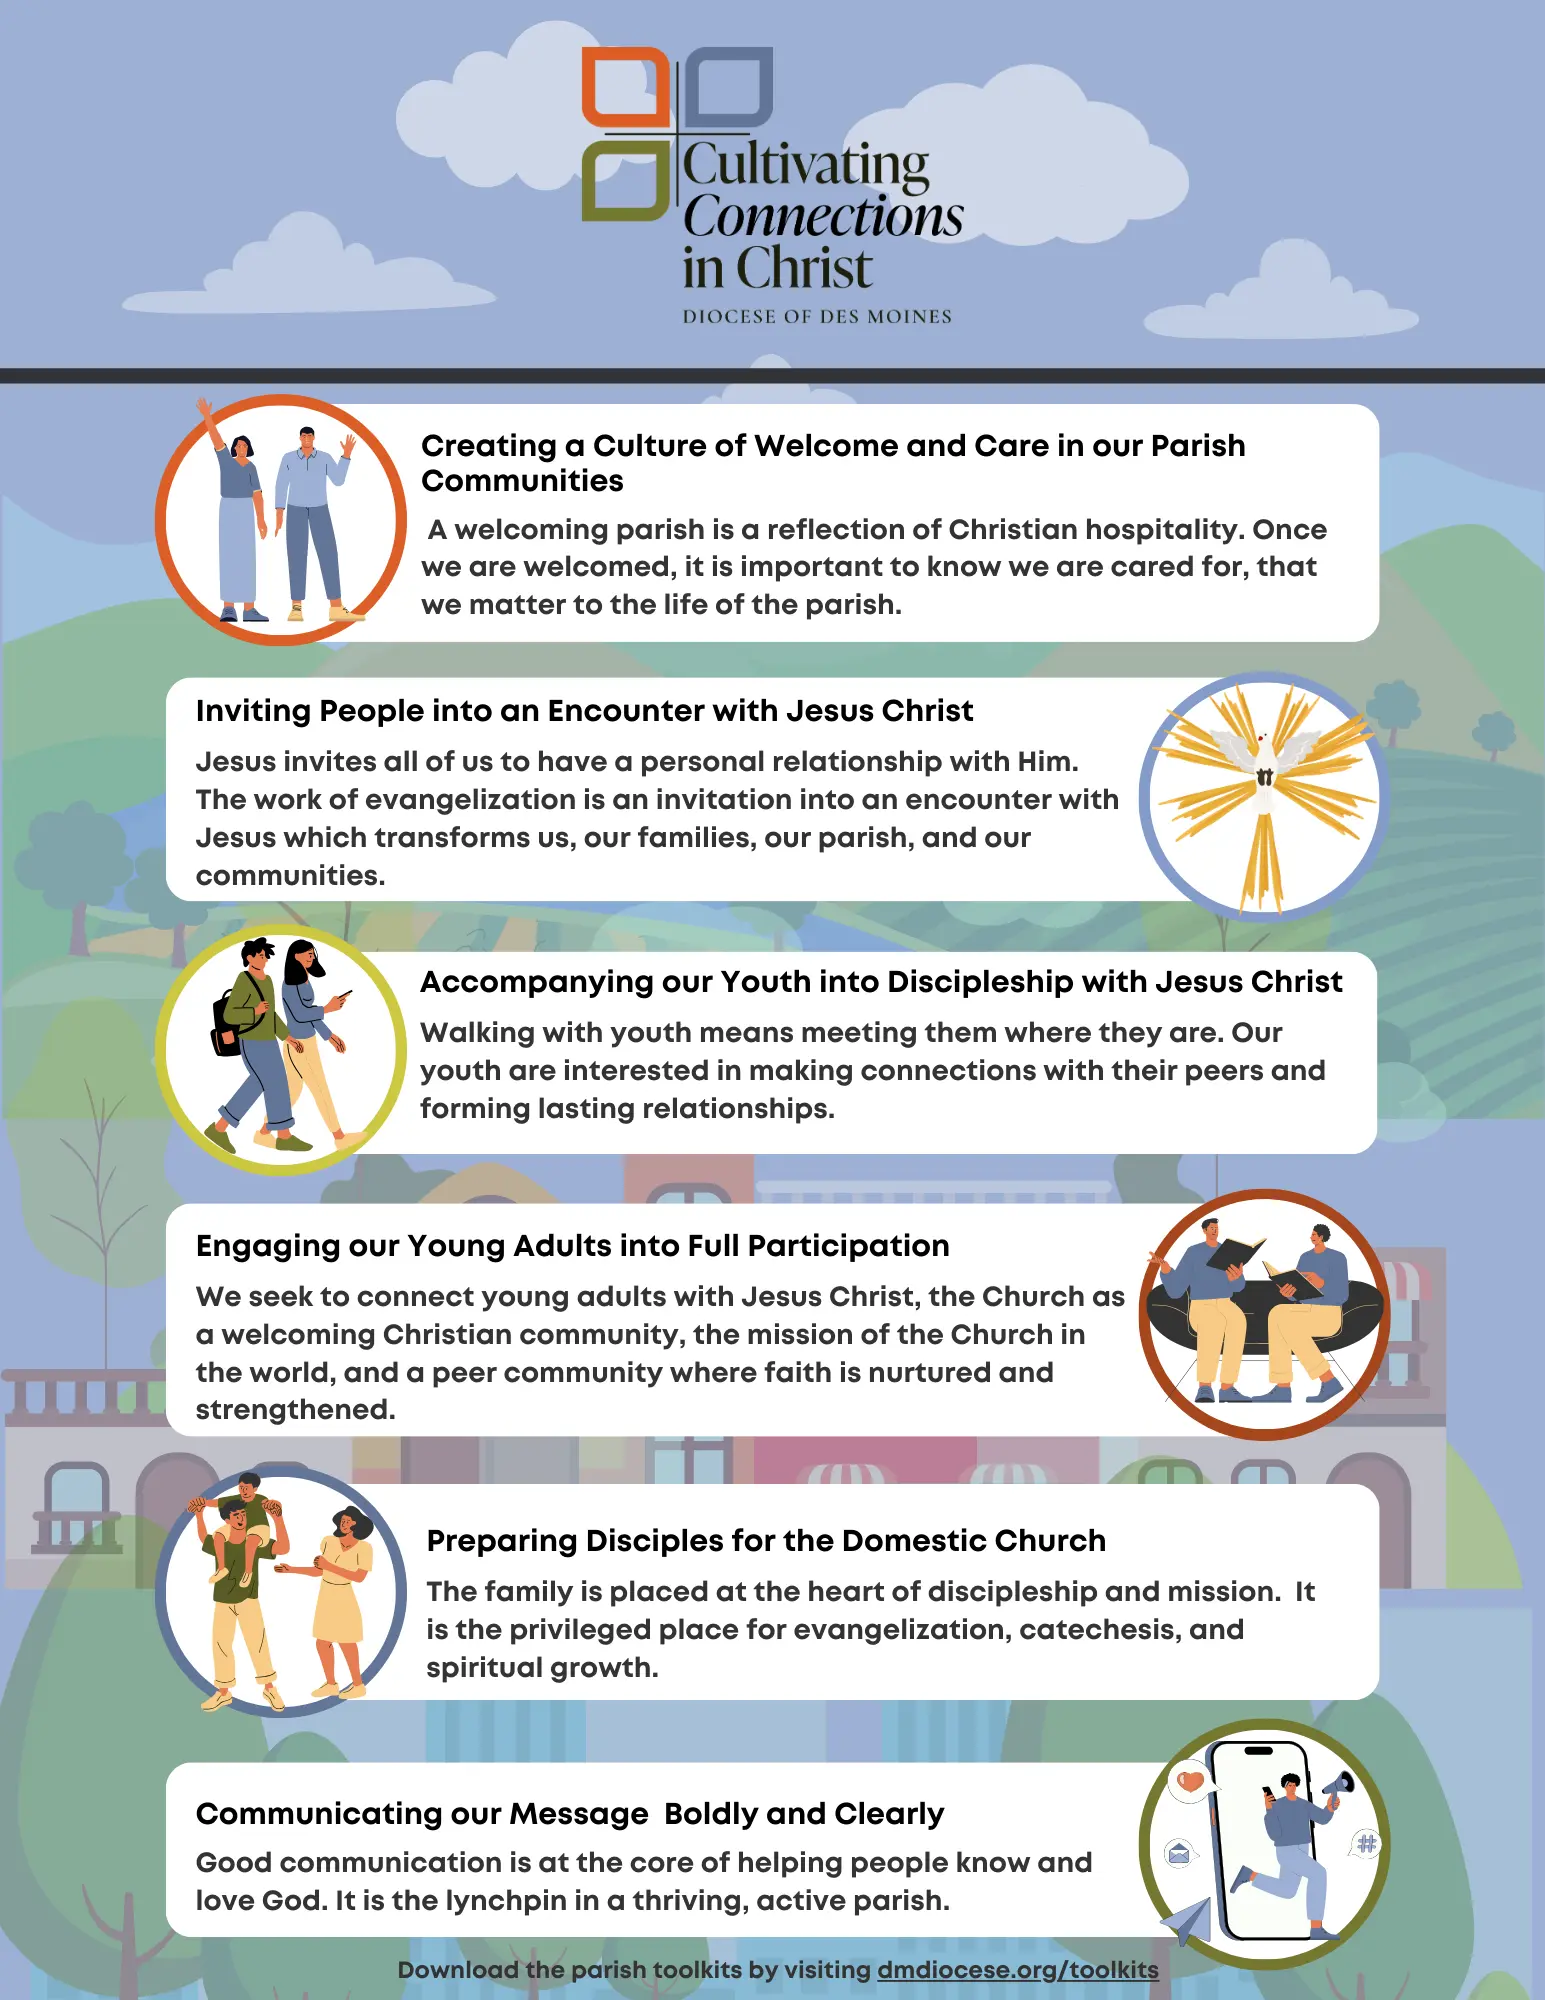 Infographic outlining the 6 priorities of the Diocese